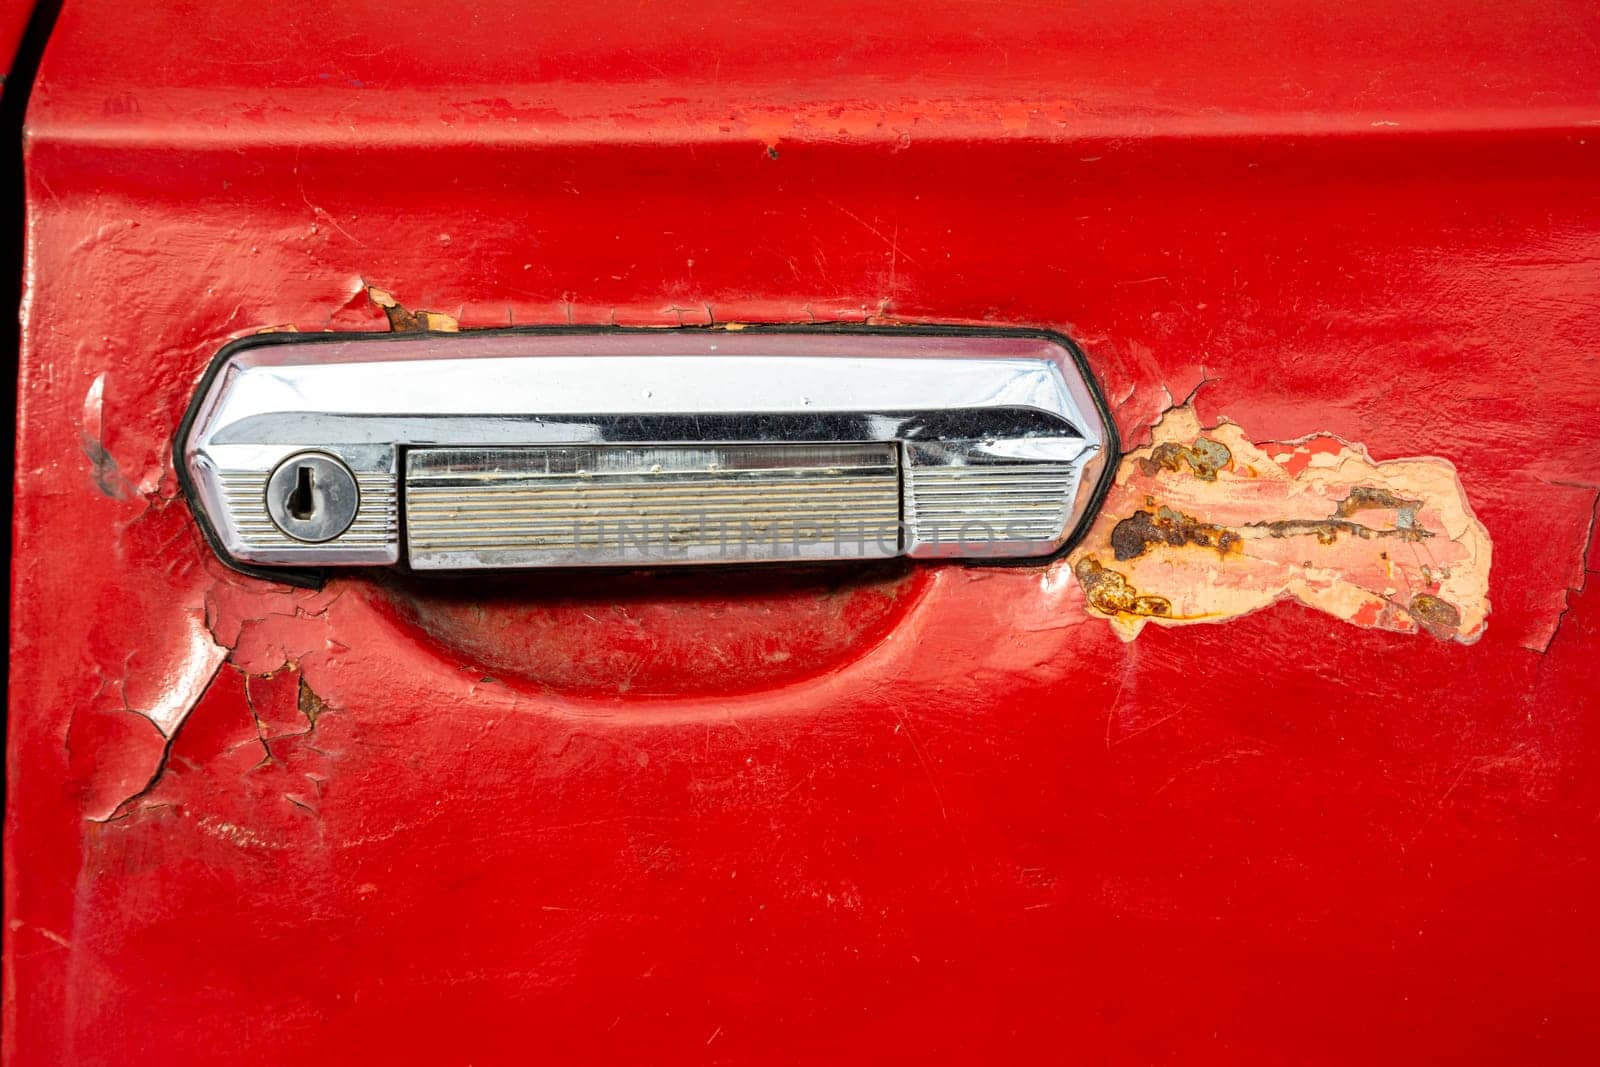 old car door handle close-up. The red door of an old car with a keyhole and peeling paint and putty